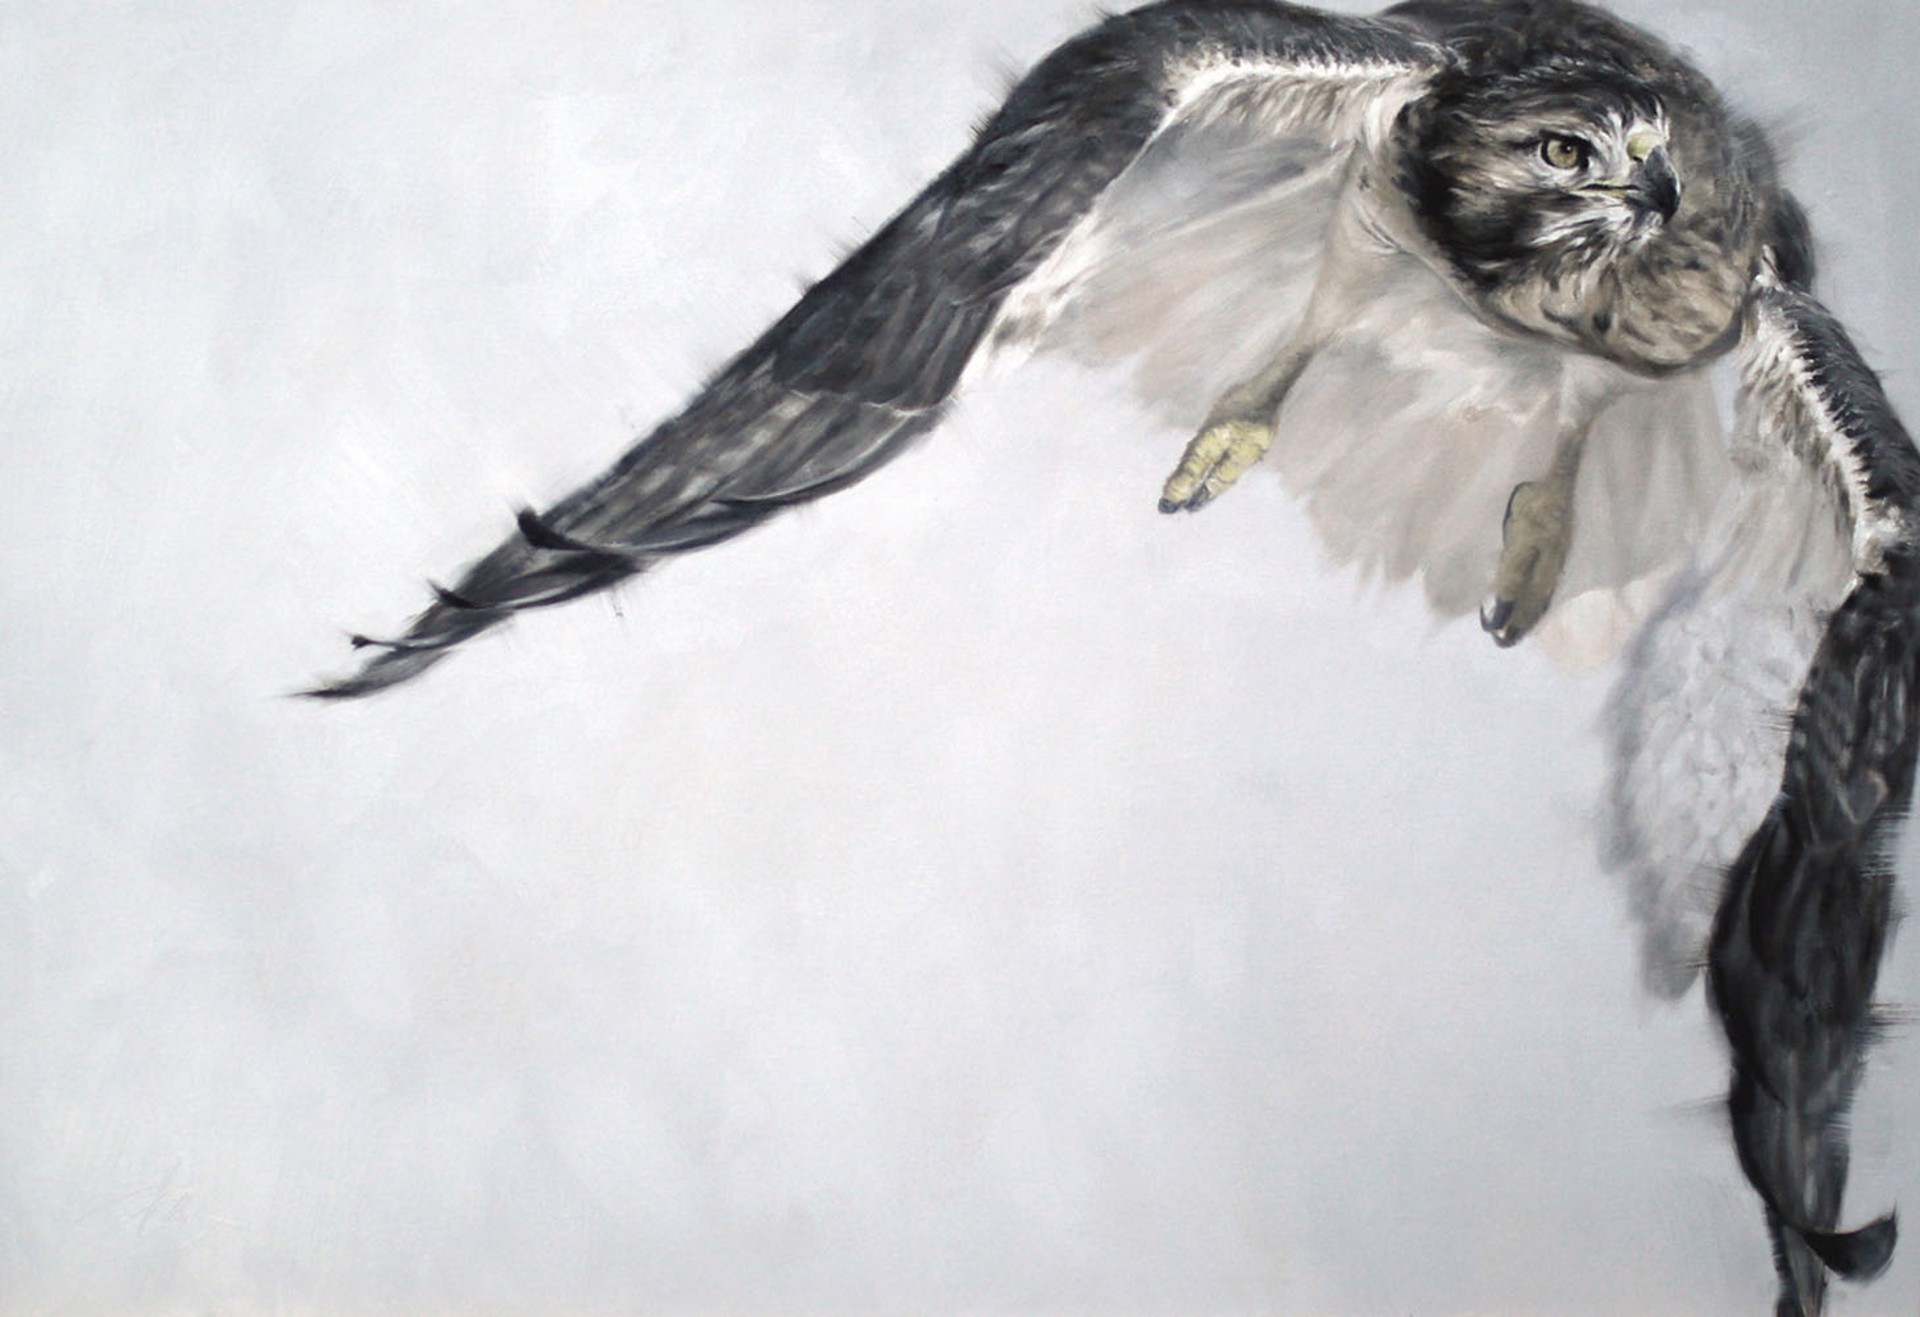 Original Oil Painting By Doyle Hostetler Featuring A Hawk In Flight In Muted Color Scheme